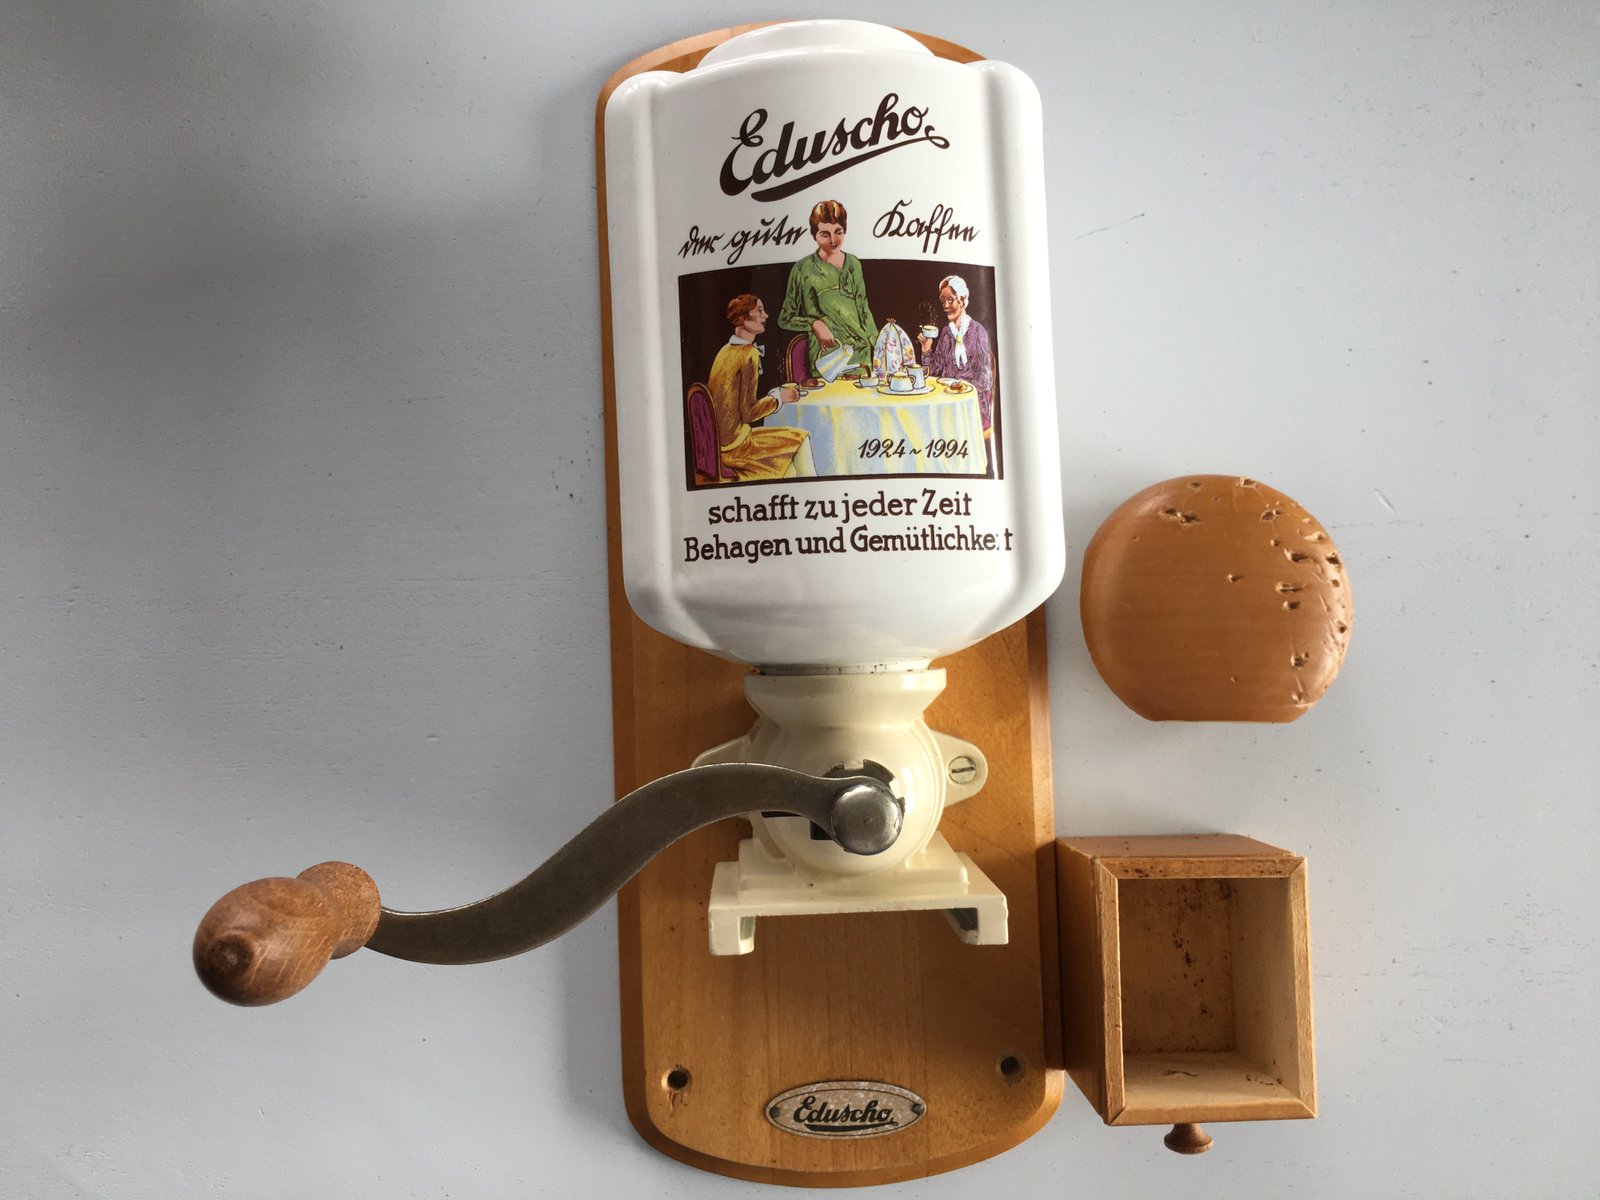 Eduscho Wall Coffee Grinder, 1990s for sale at Pamono